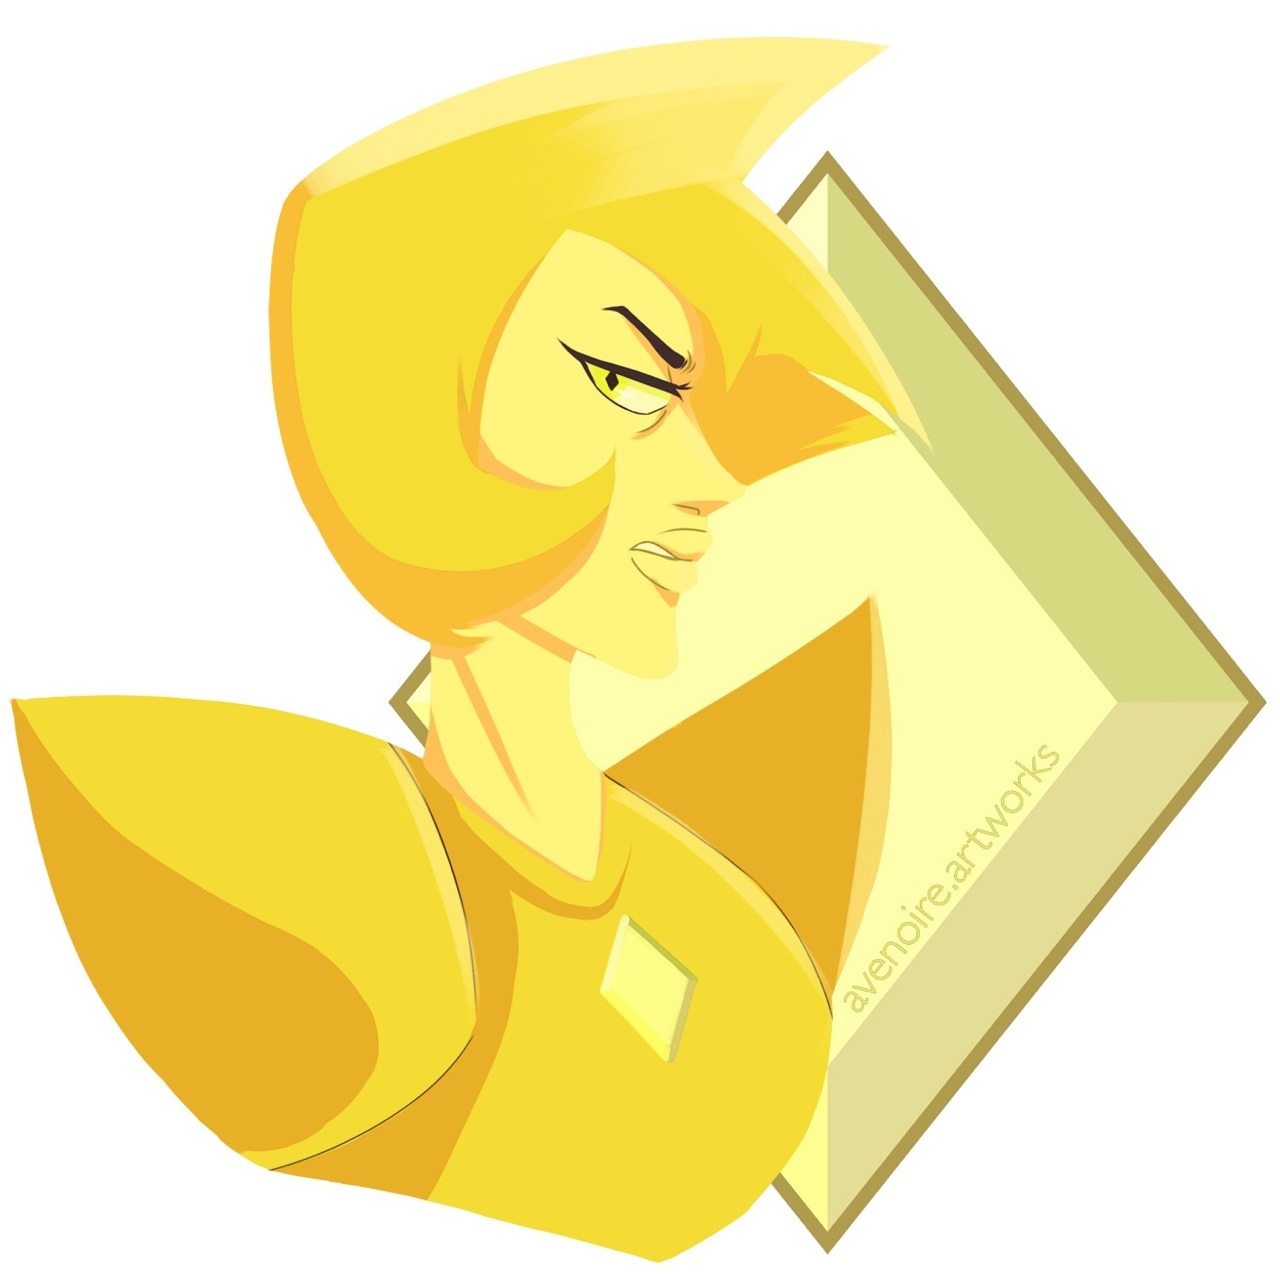 The Diamond Authority it occurred to me i have never drawn anything from SU (despite my on and off love for the show)